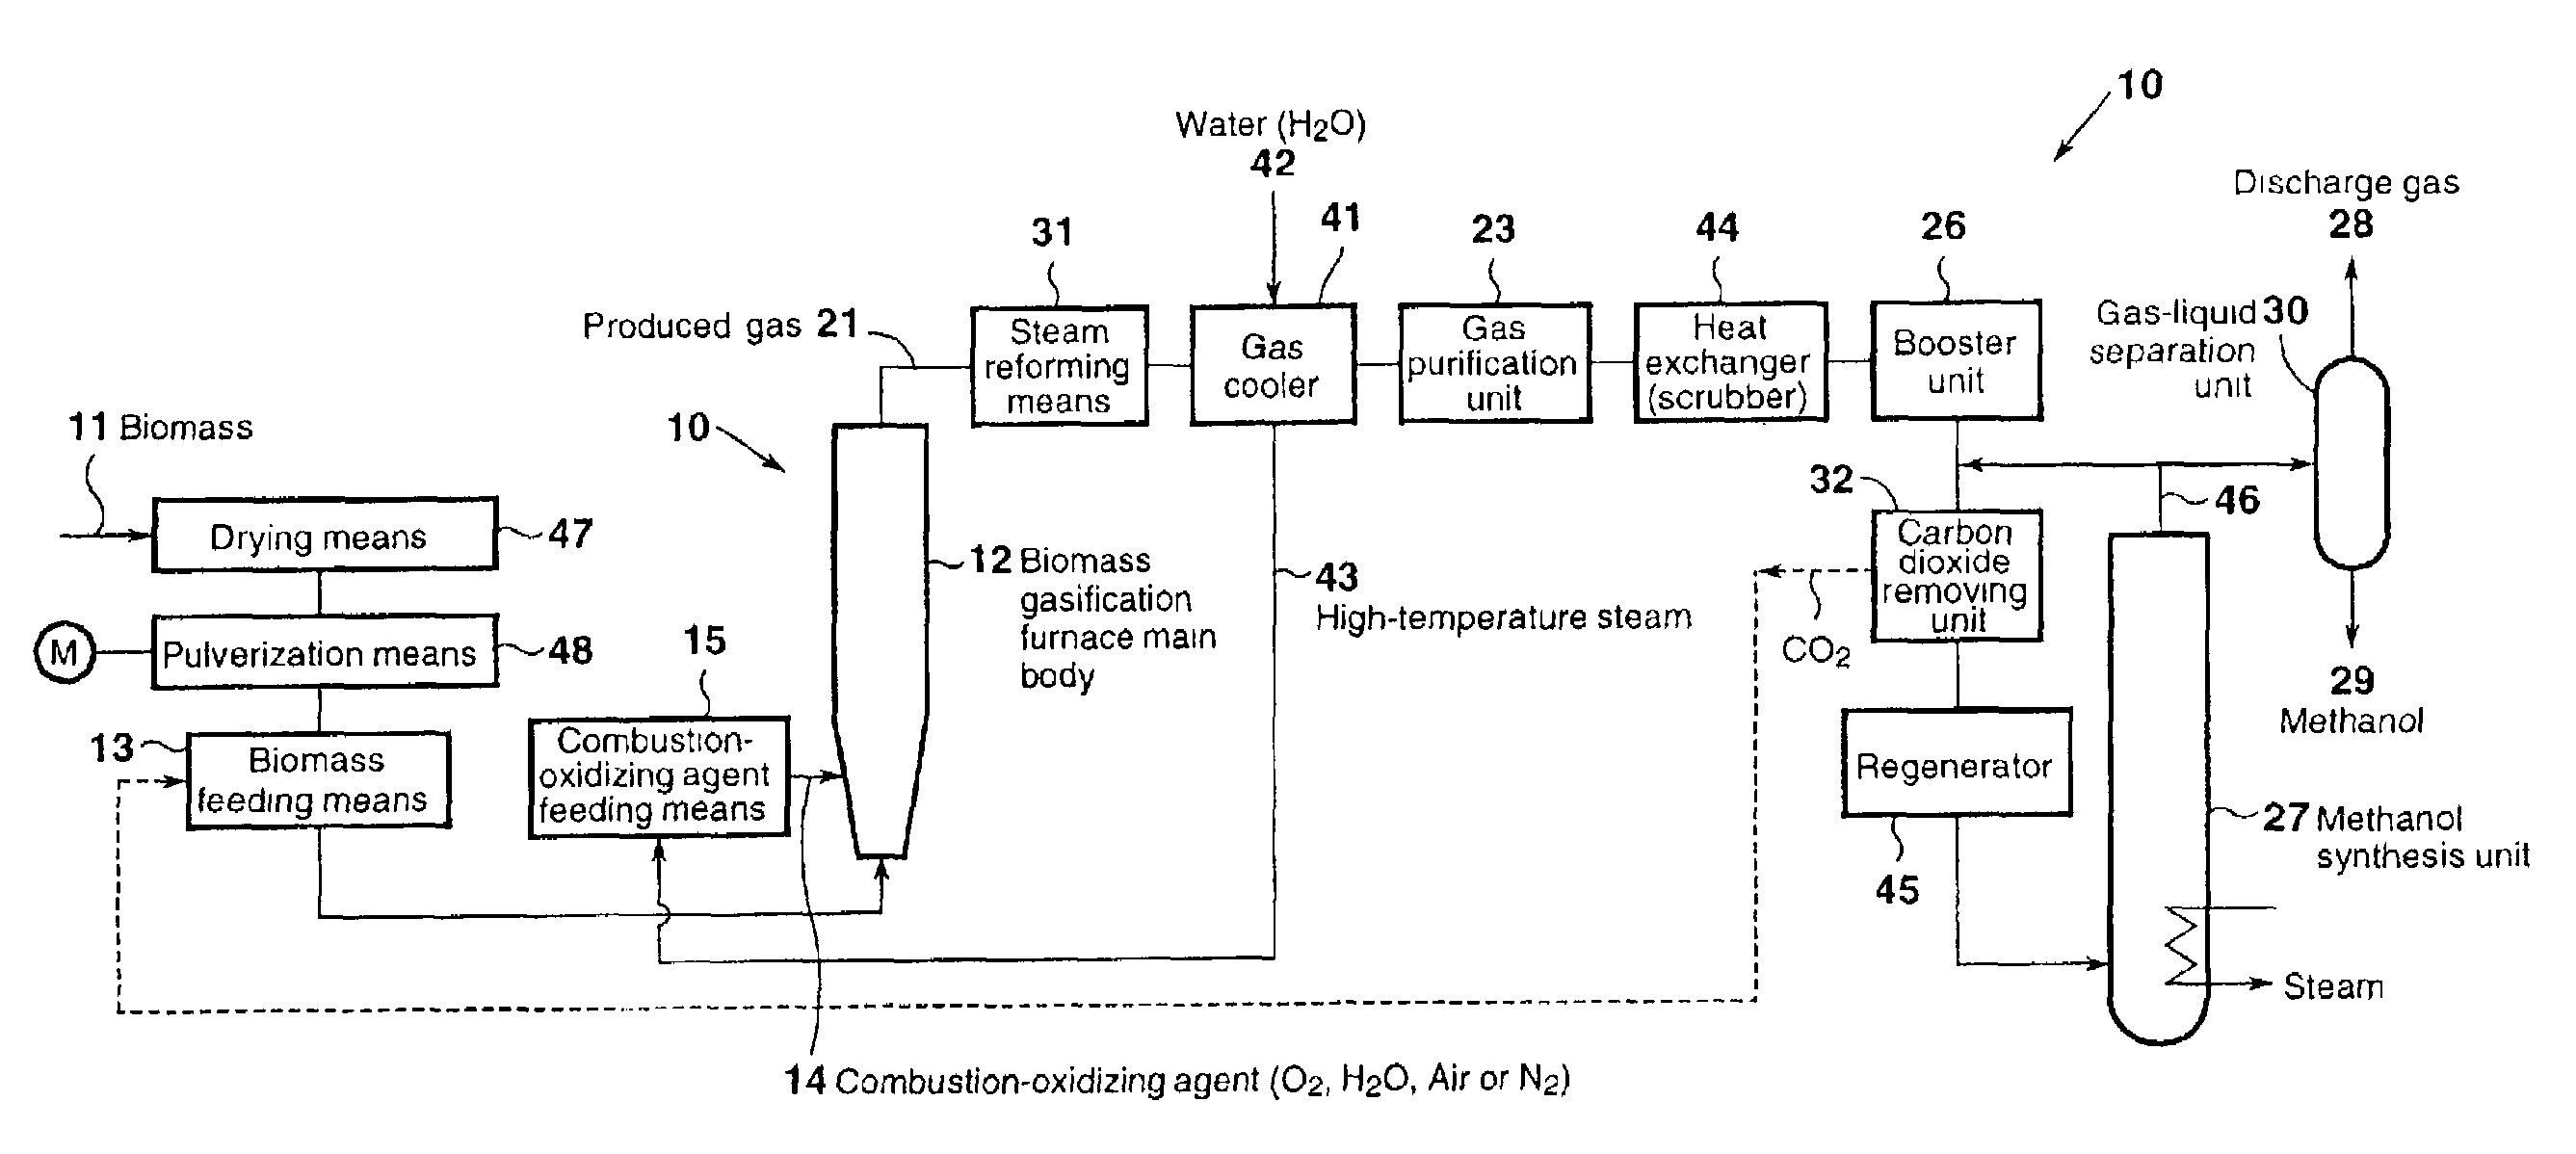 Biomass gasifycation furnace and system for methanol synthesis using gas produced by gasifying biomass